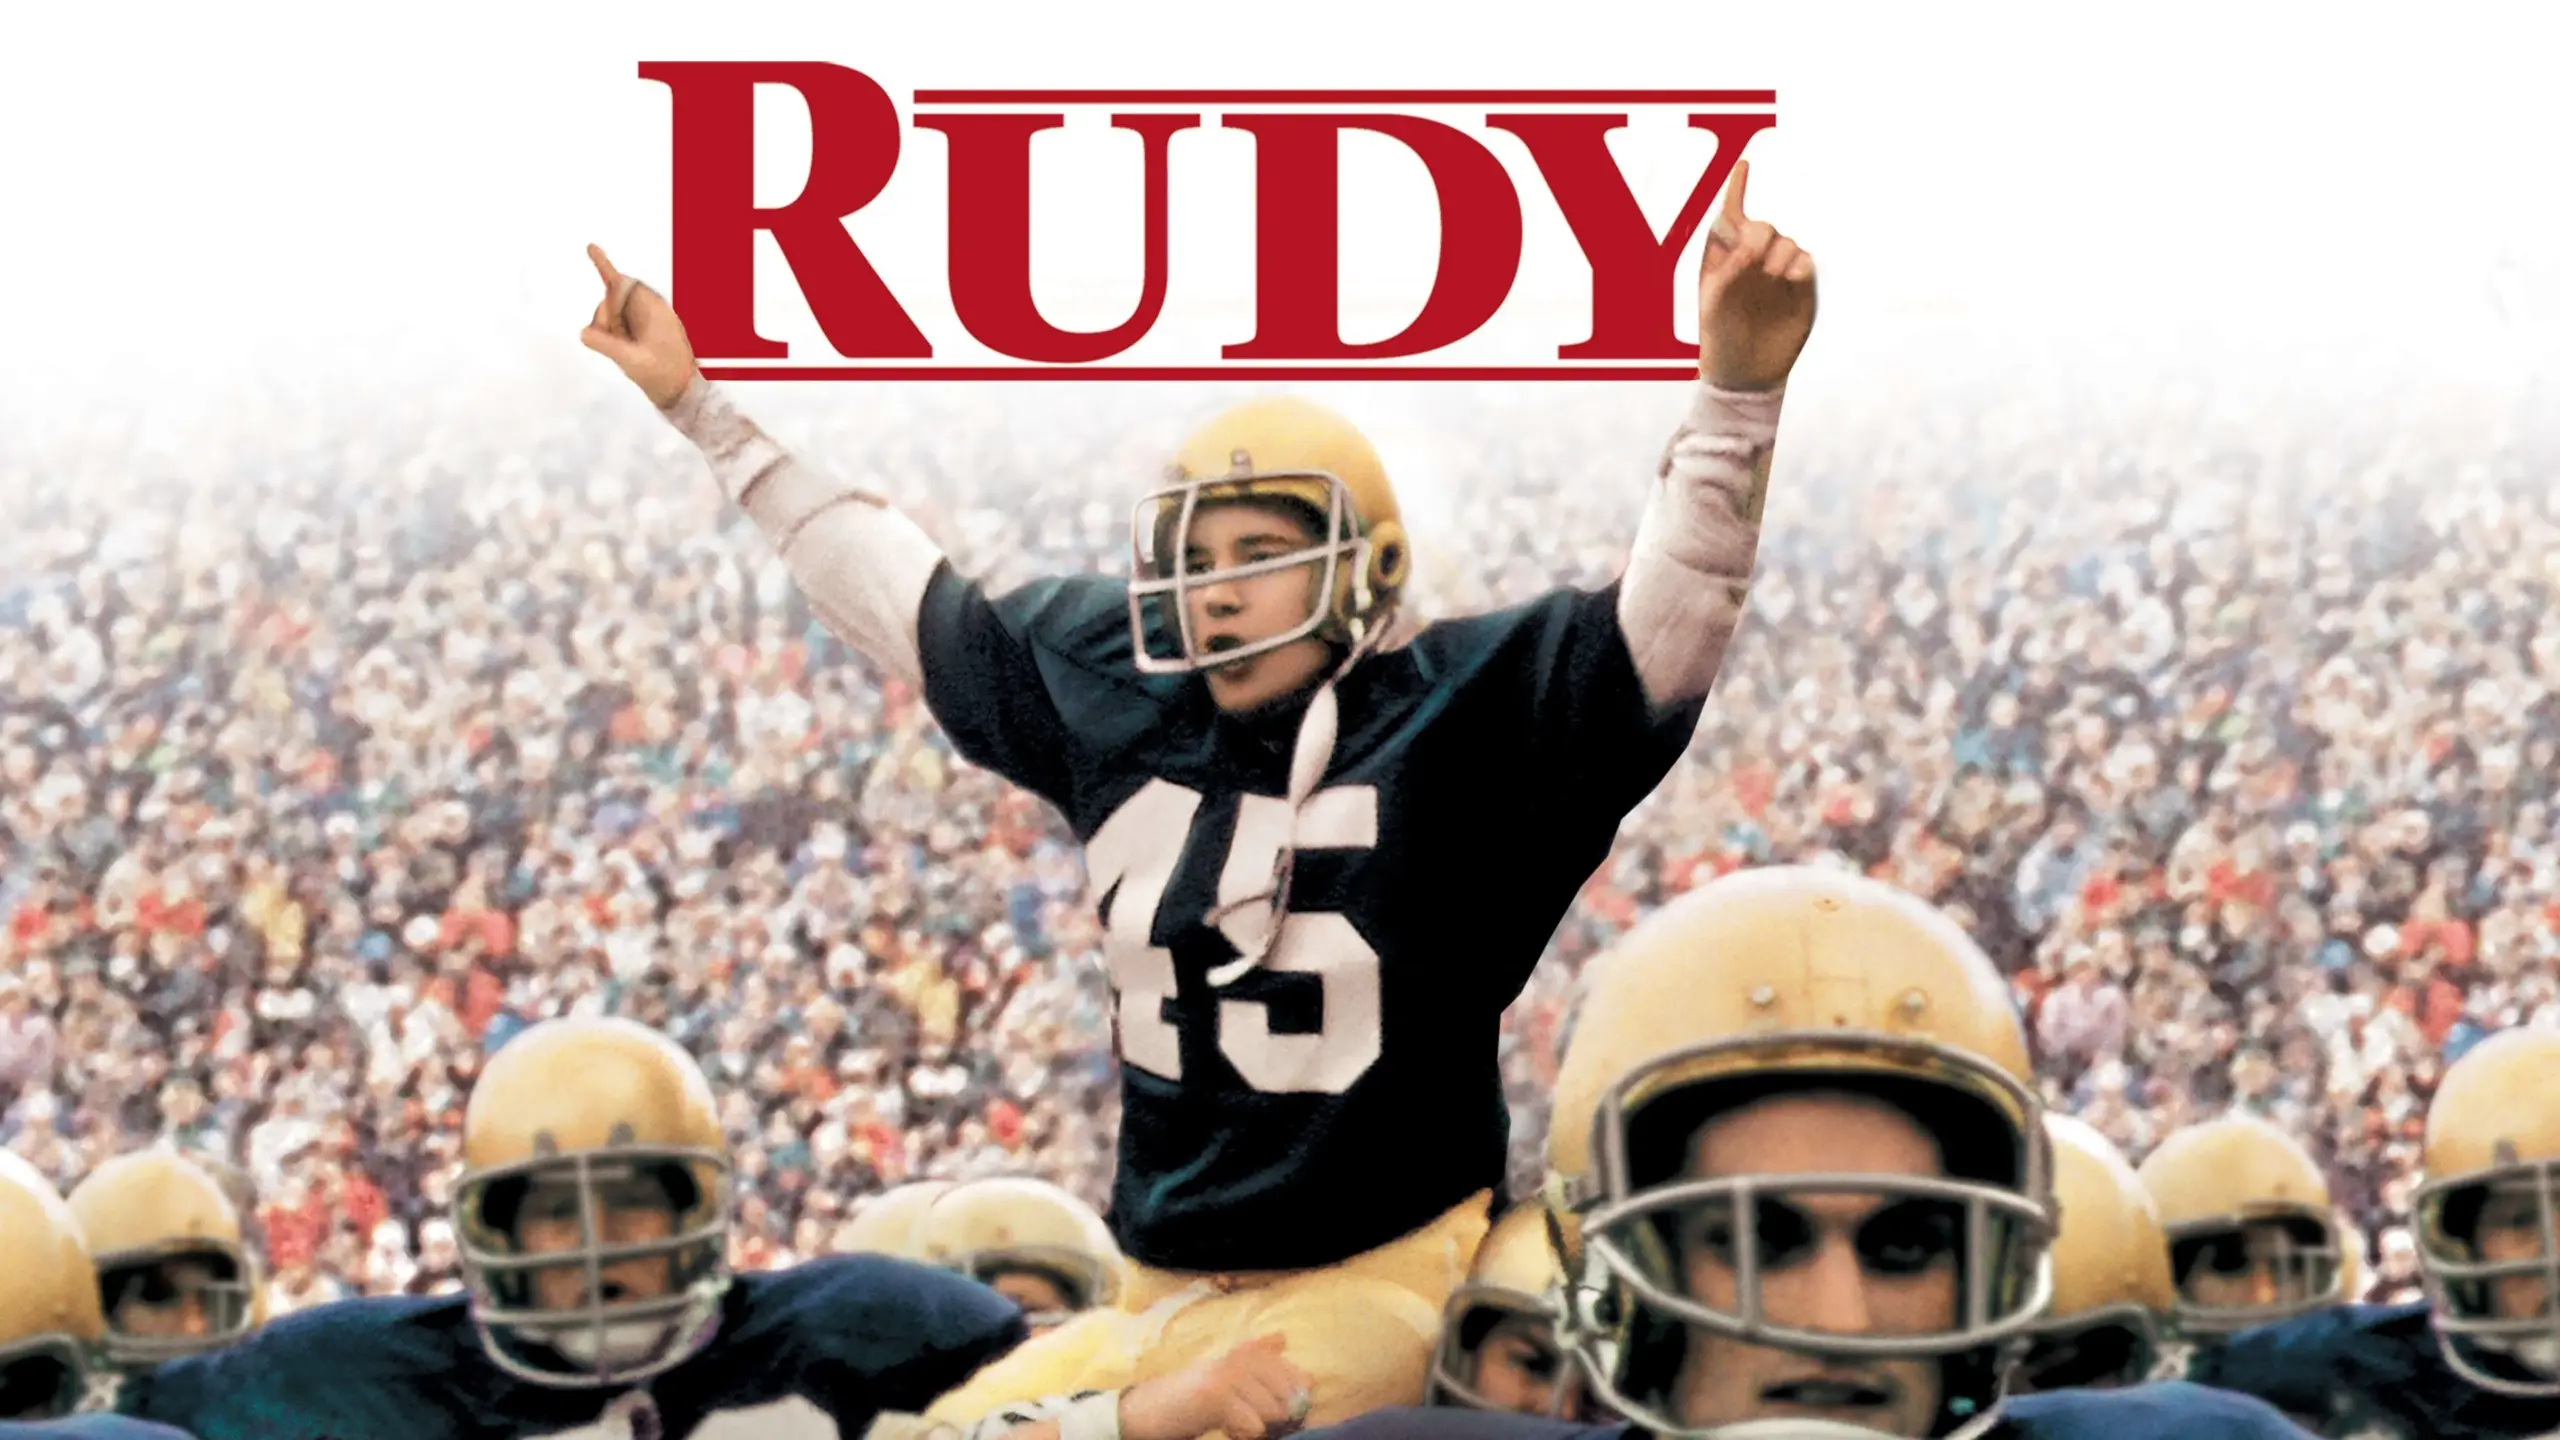 The True Story Behind the Beloved Film Rudy